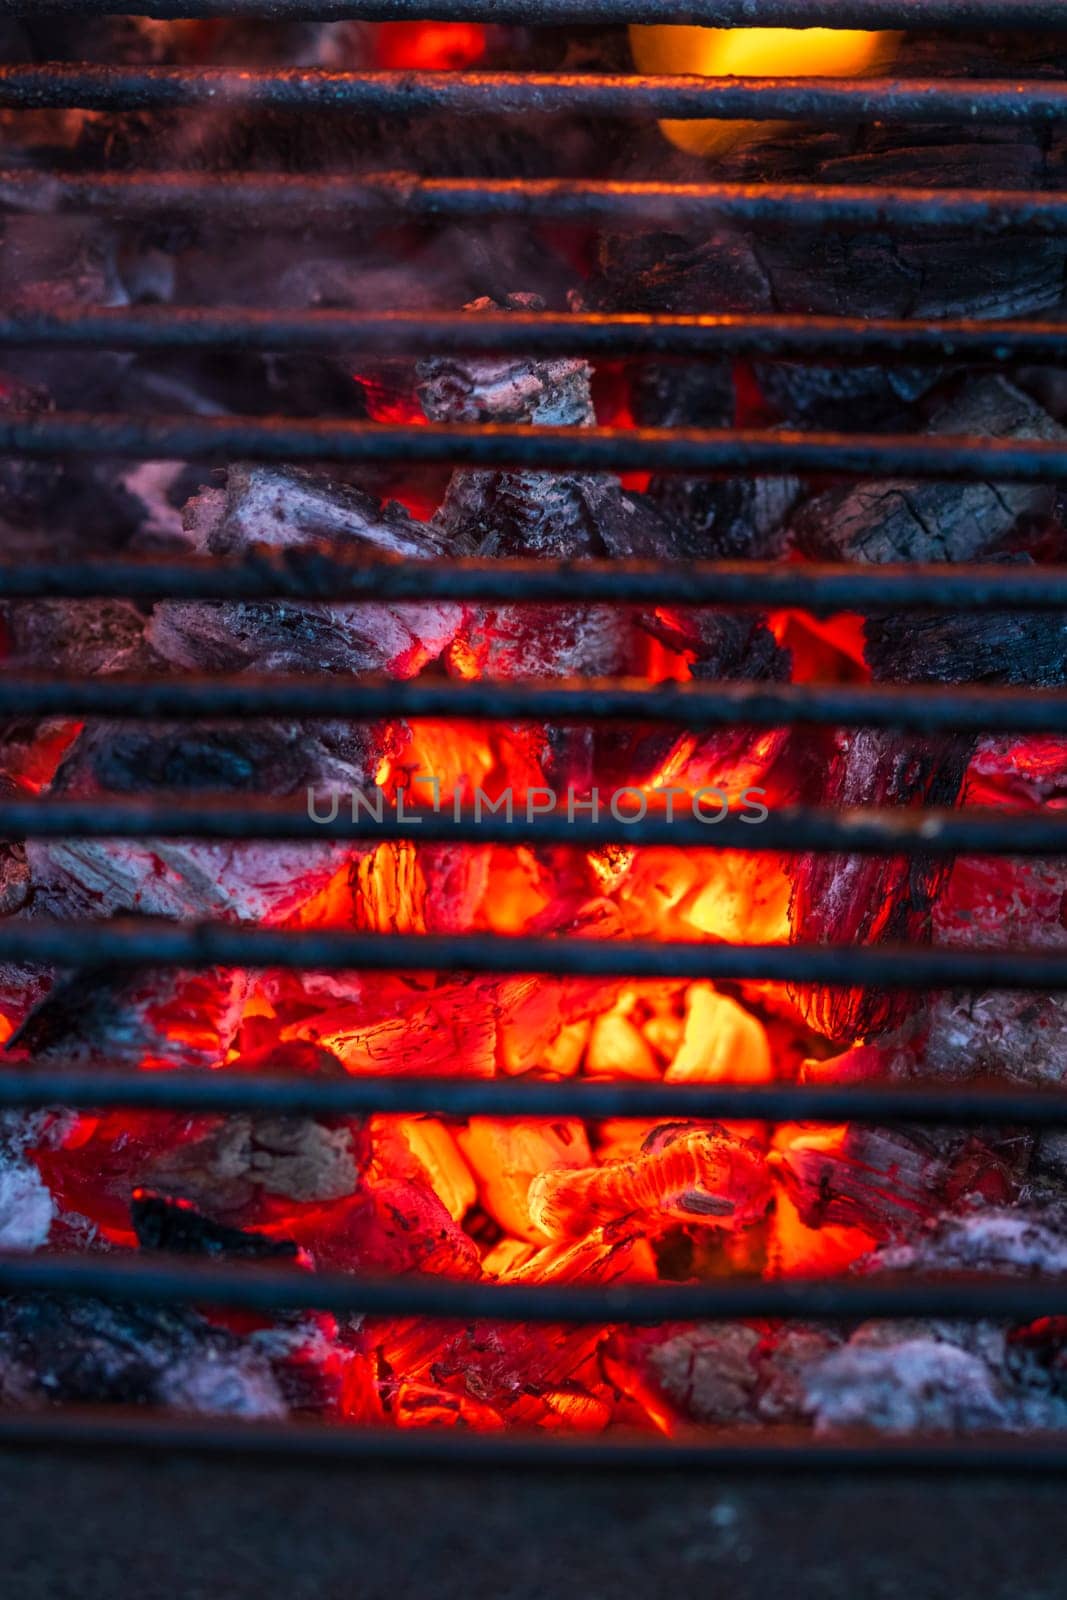 Barbecue grill pit with glowing and flaming hot charcoal briquettes